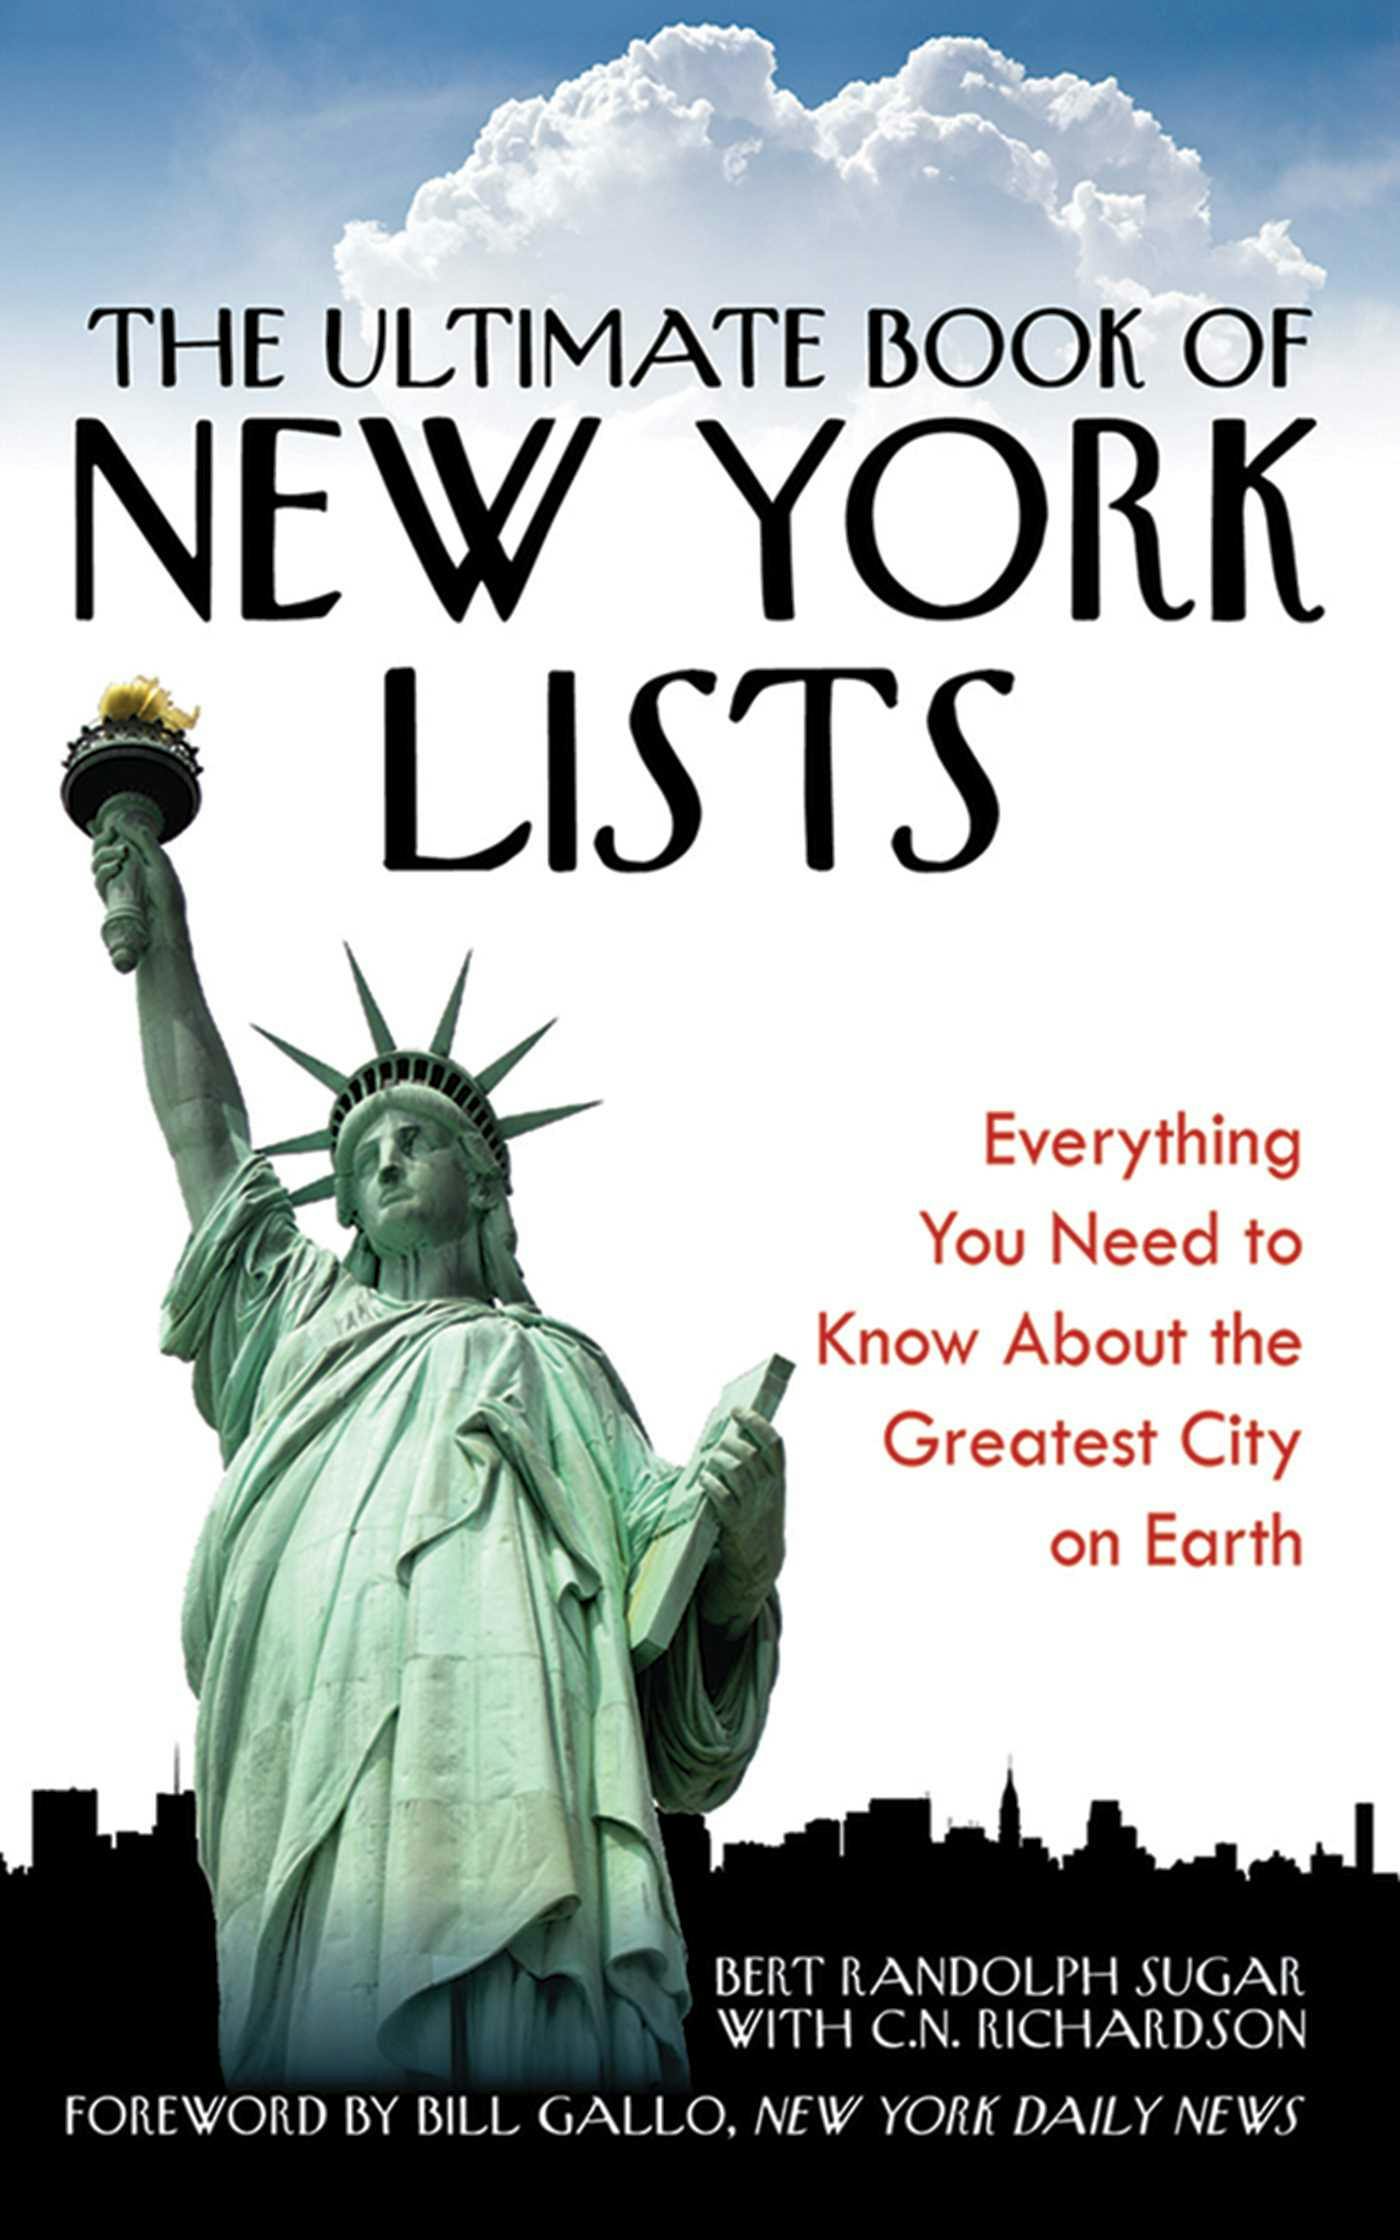 The Ultimate Book of New York Lists: Everything You Need to Know About the Greatest City on Earth - Bert Randolph Sugar